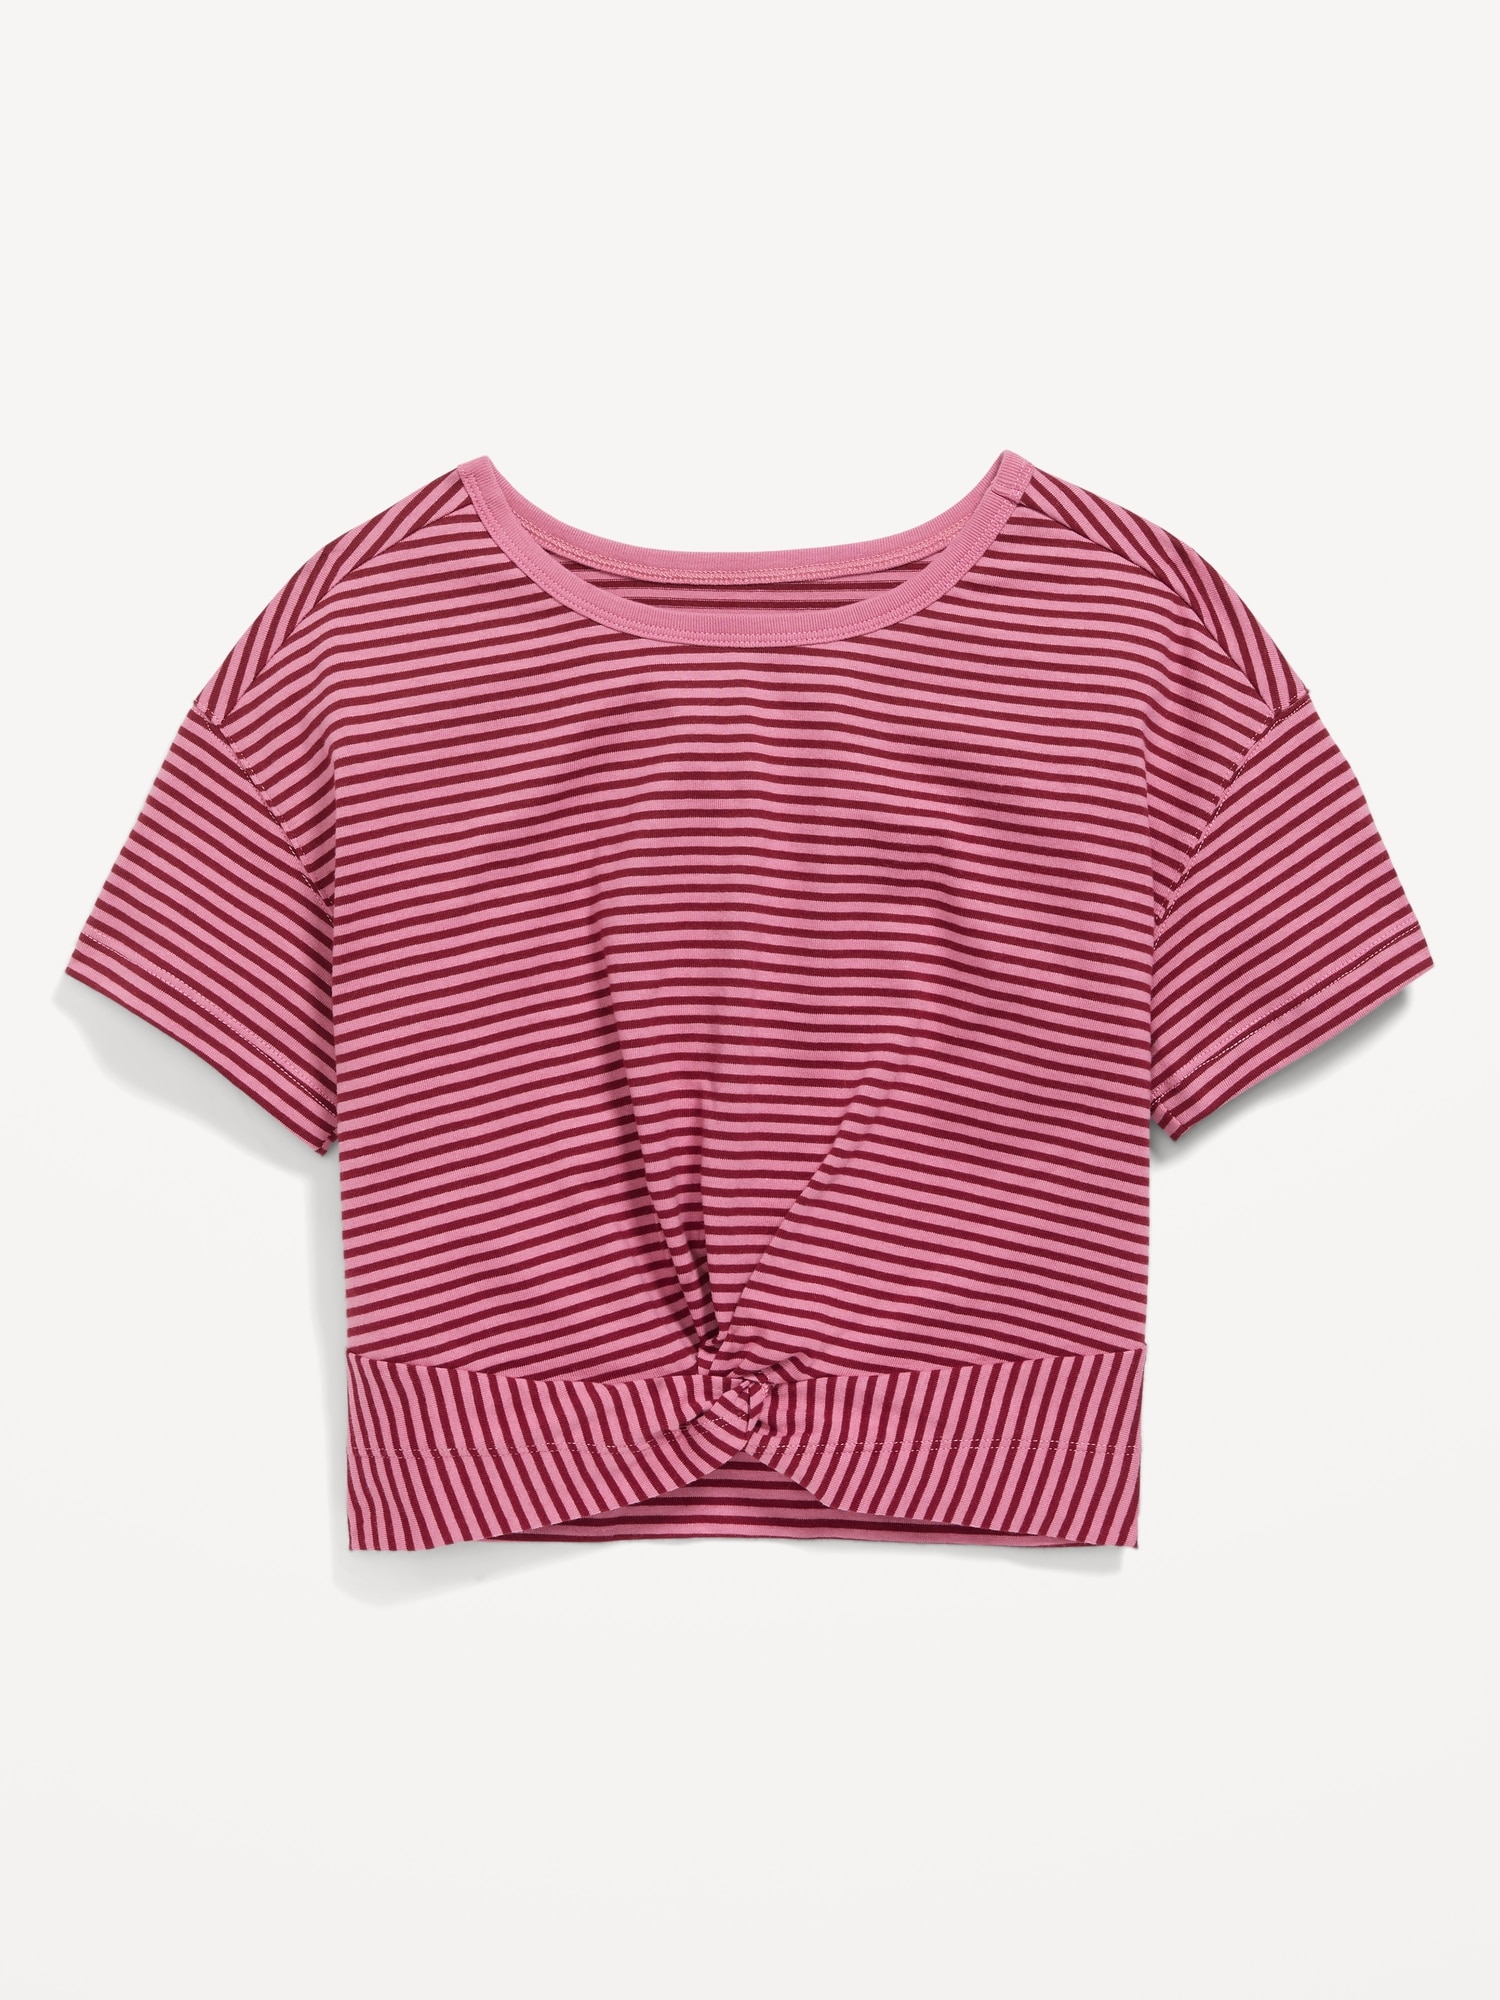 Short Sleeve Striped Twist Front T Shirt For Girls Old Navy